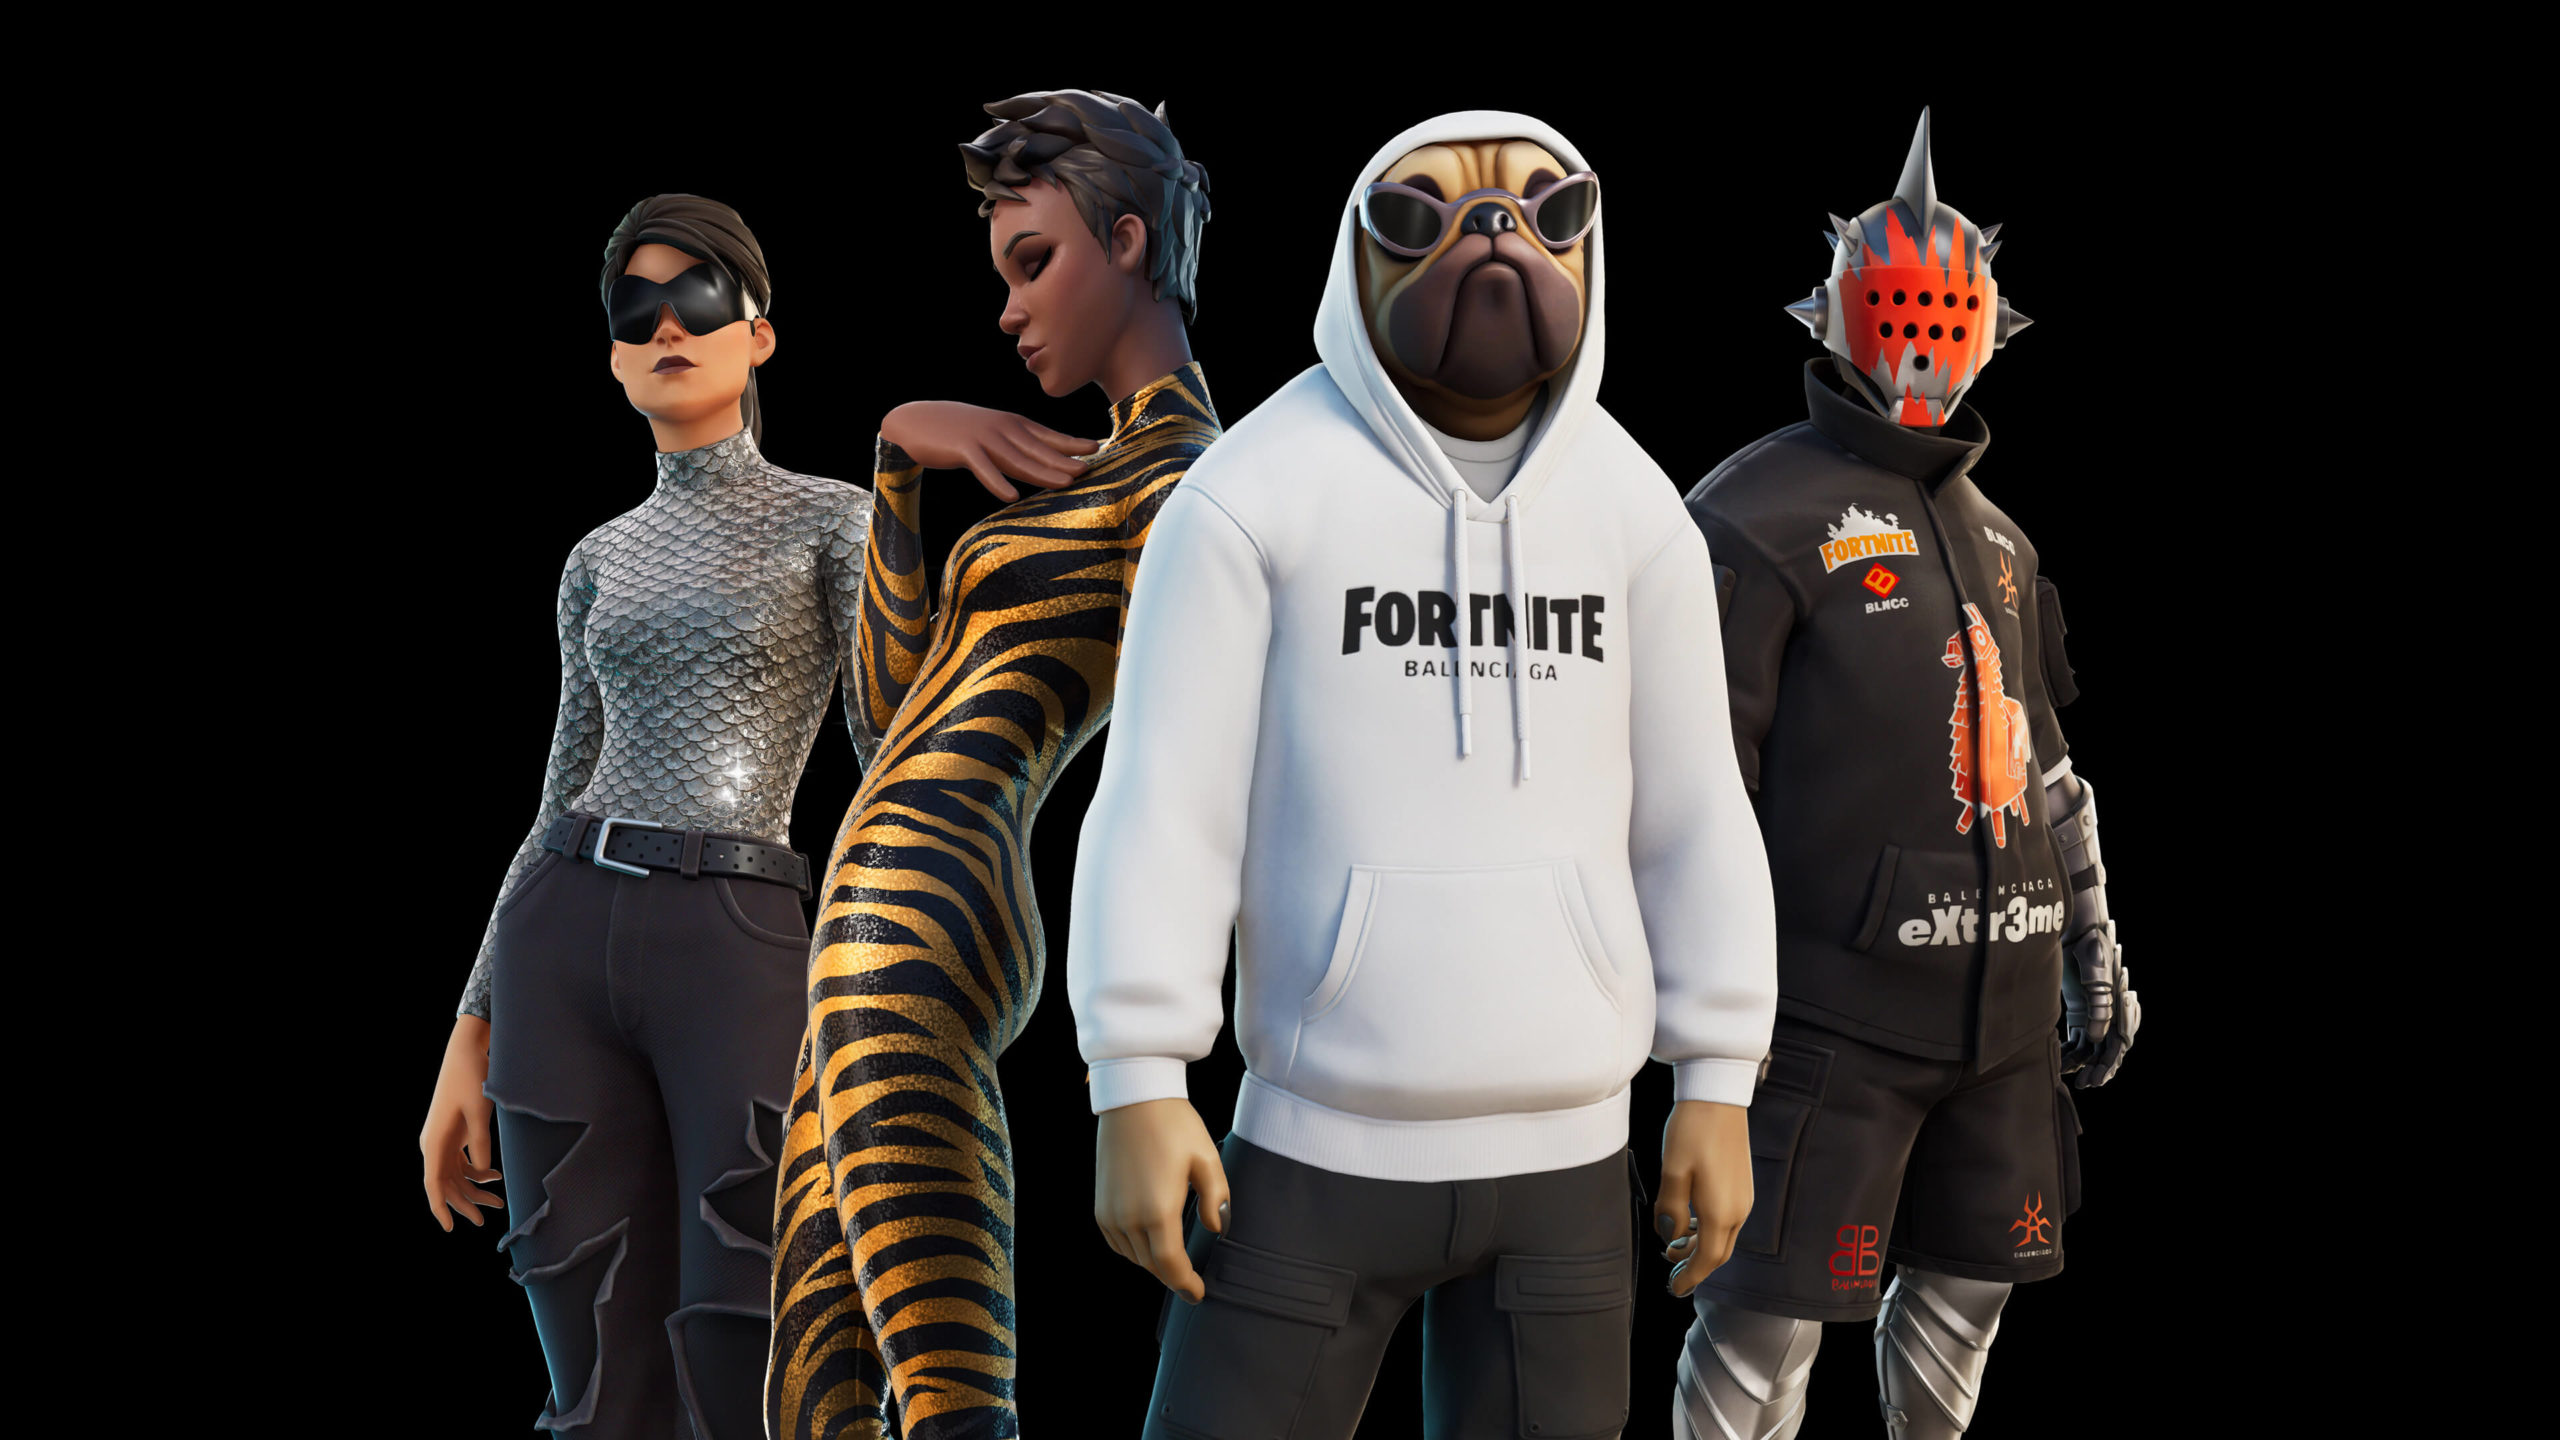 Different avatars from the game of Fortnite look at the Camera, wearing Balenciaga merchandise